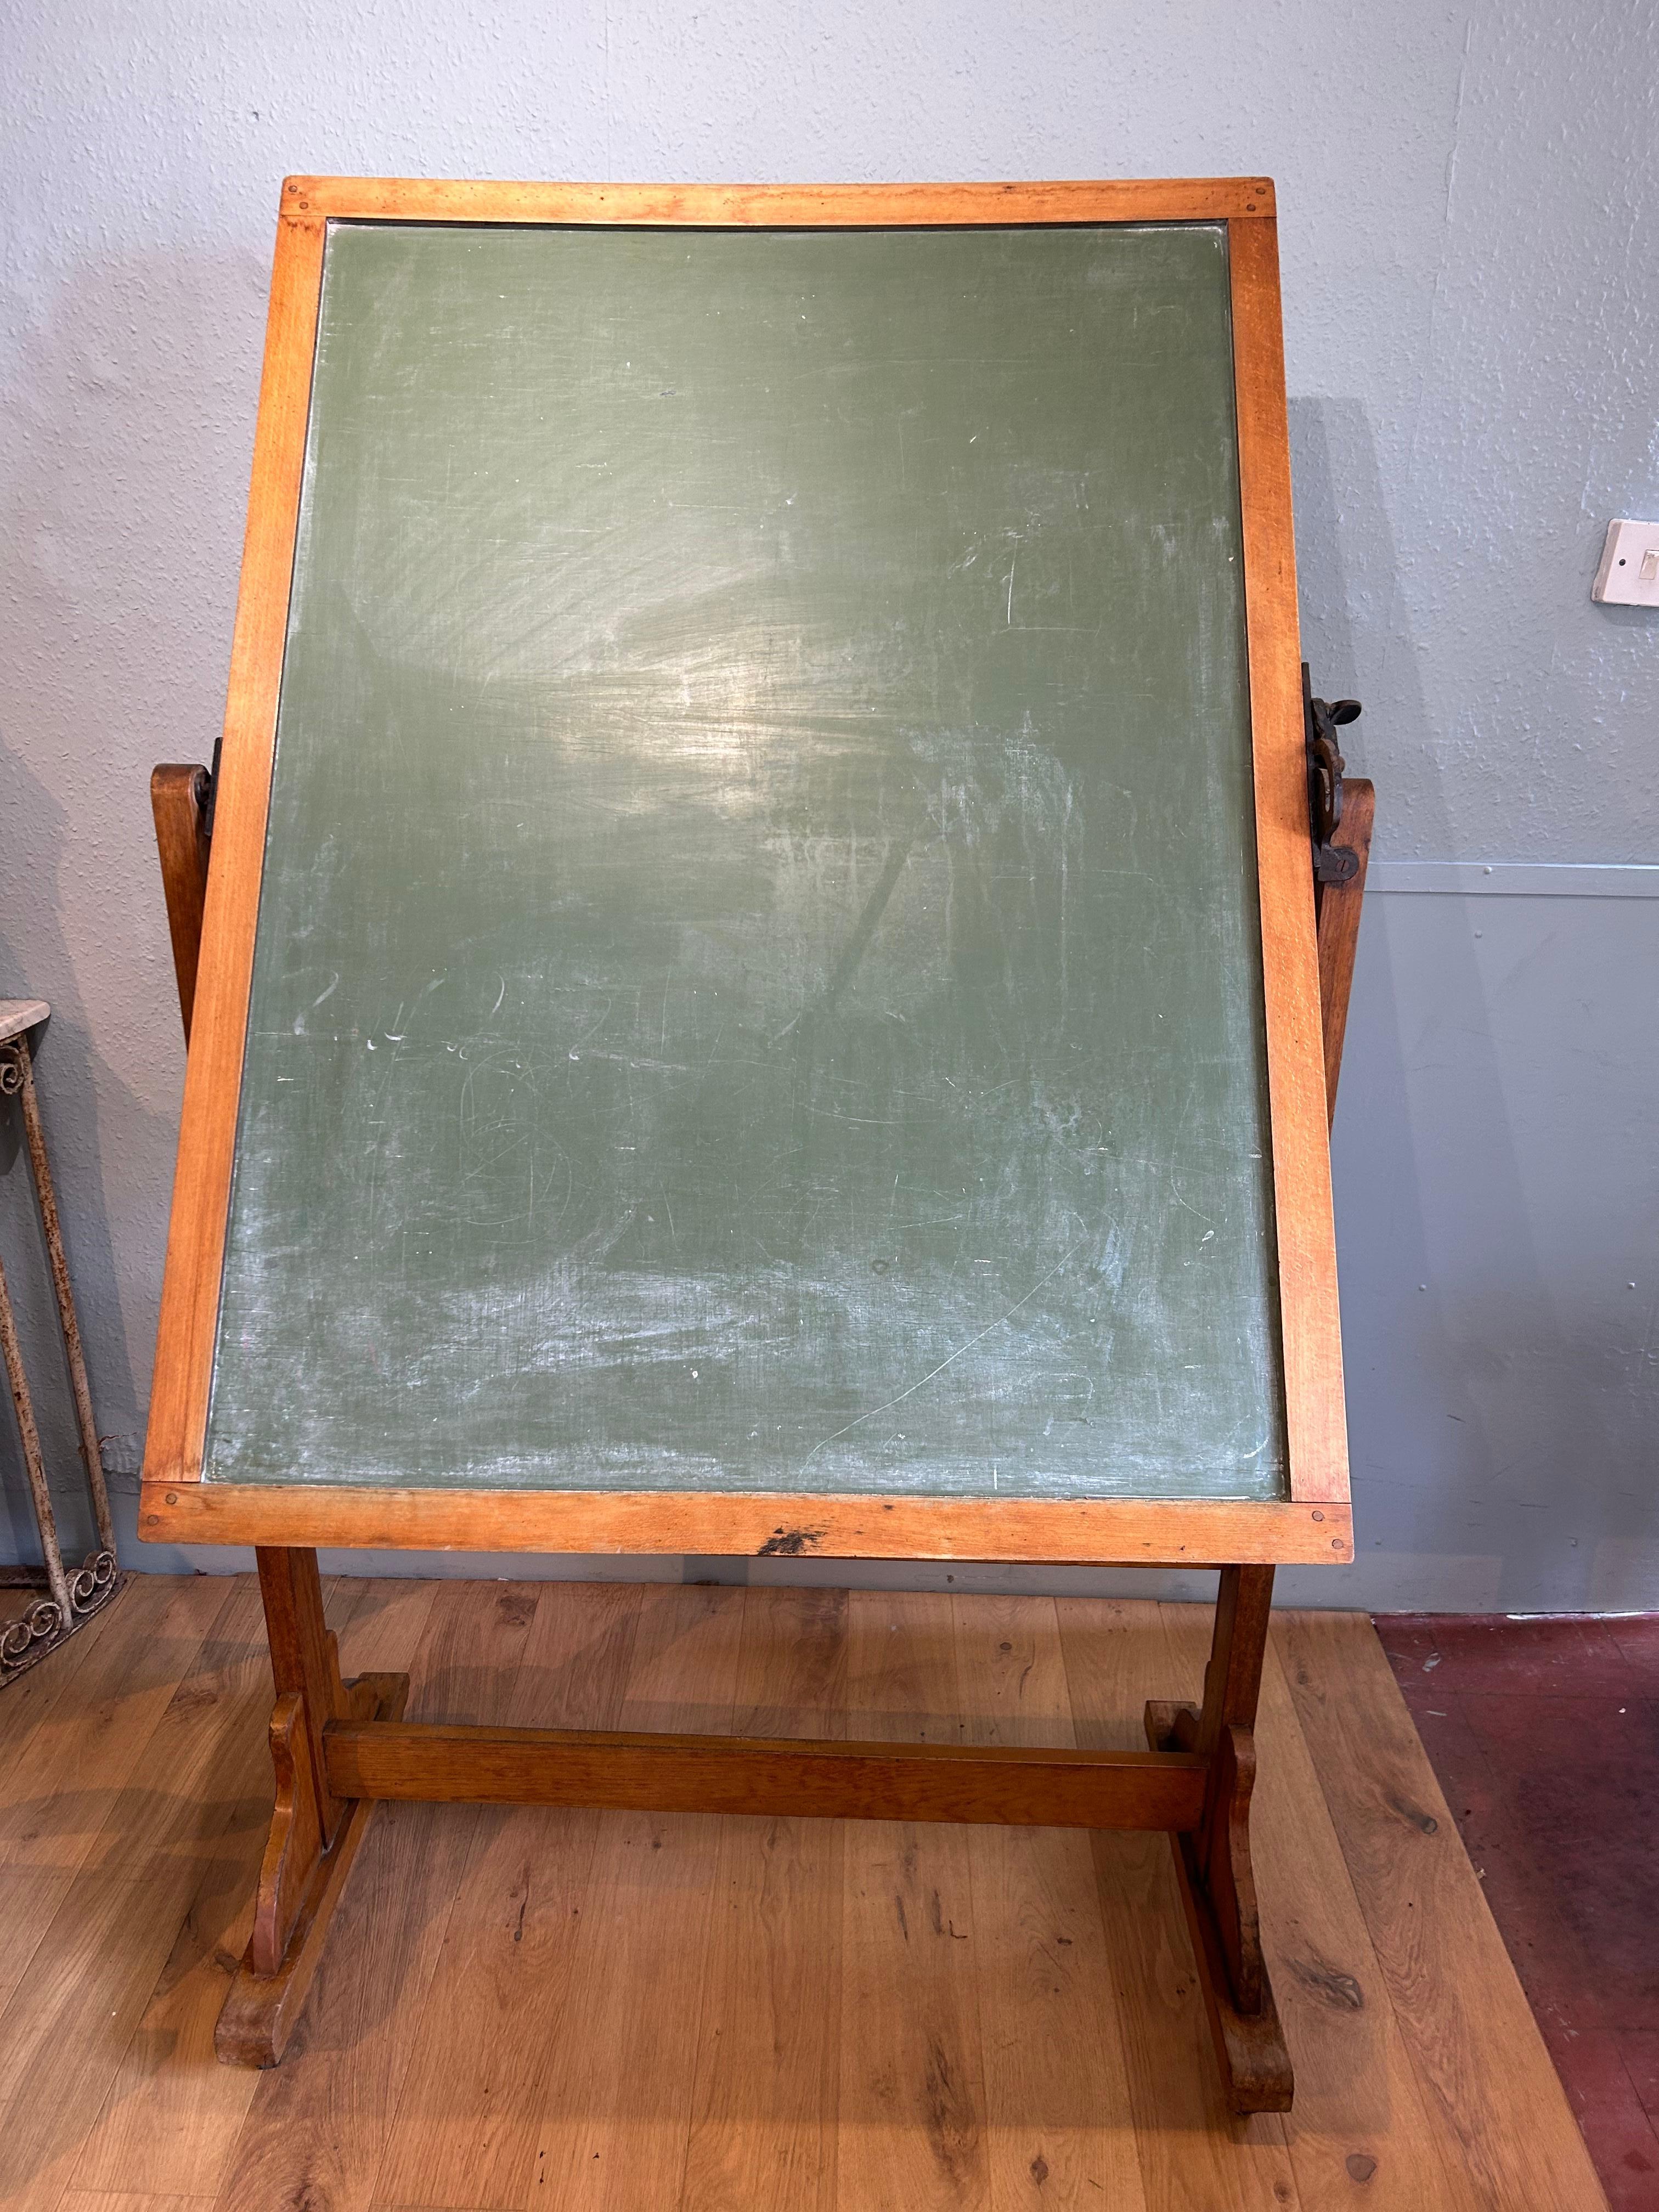 An attractive large English school blackboard, circa 1940, constructed in beech & teak. This double sided blackboard has an adjustable cast iron screw clamp to the one side, enabling the board to be tilted to whatever position is required.